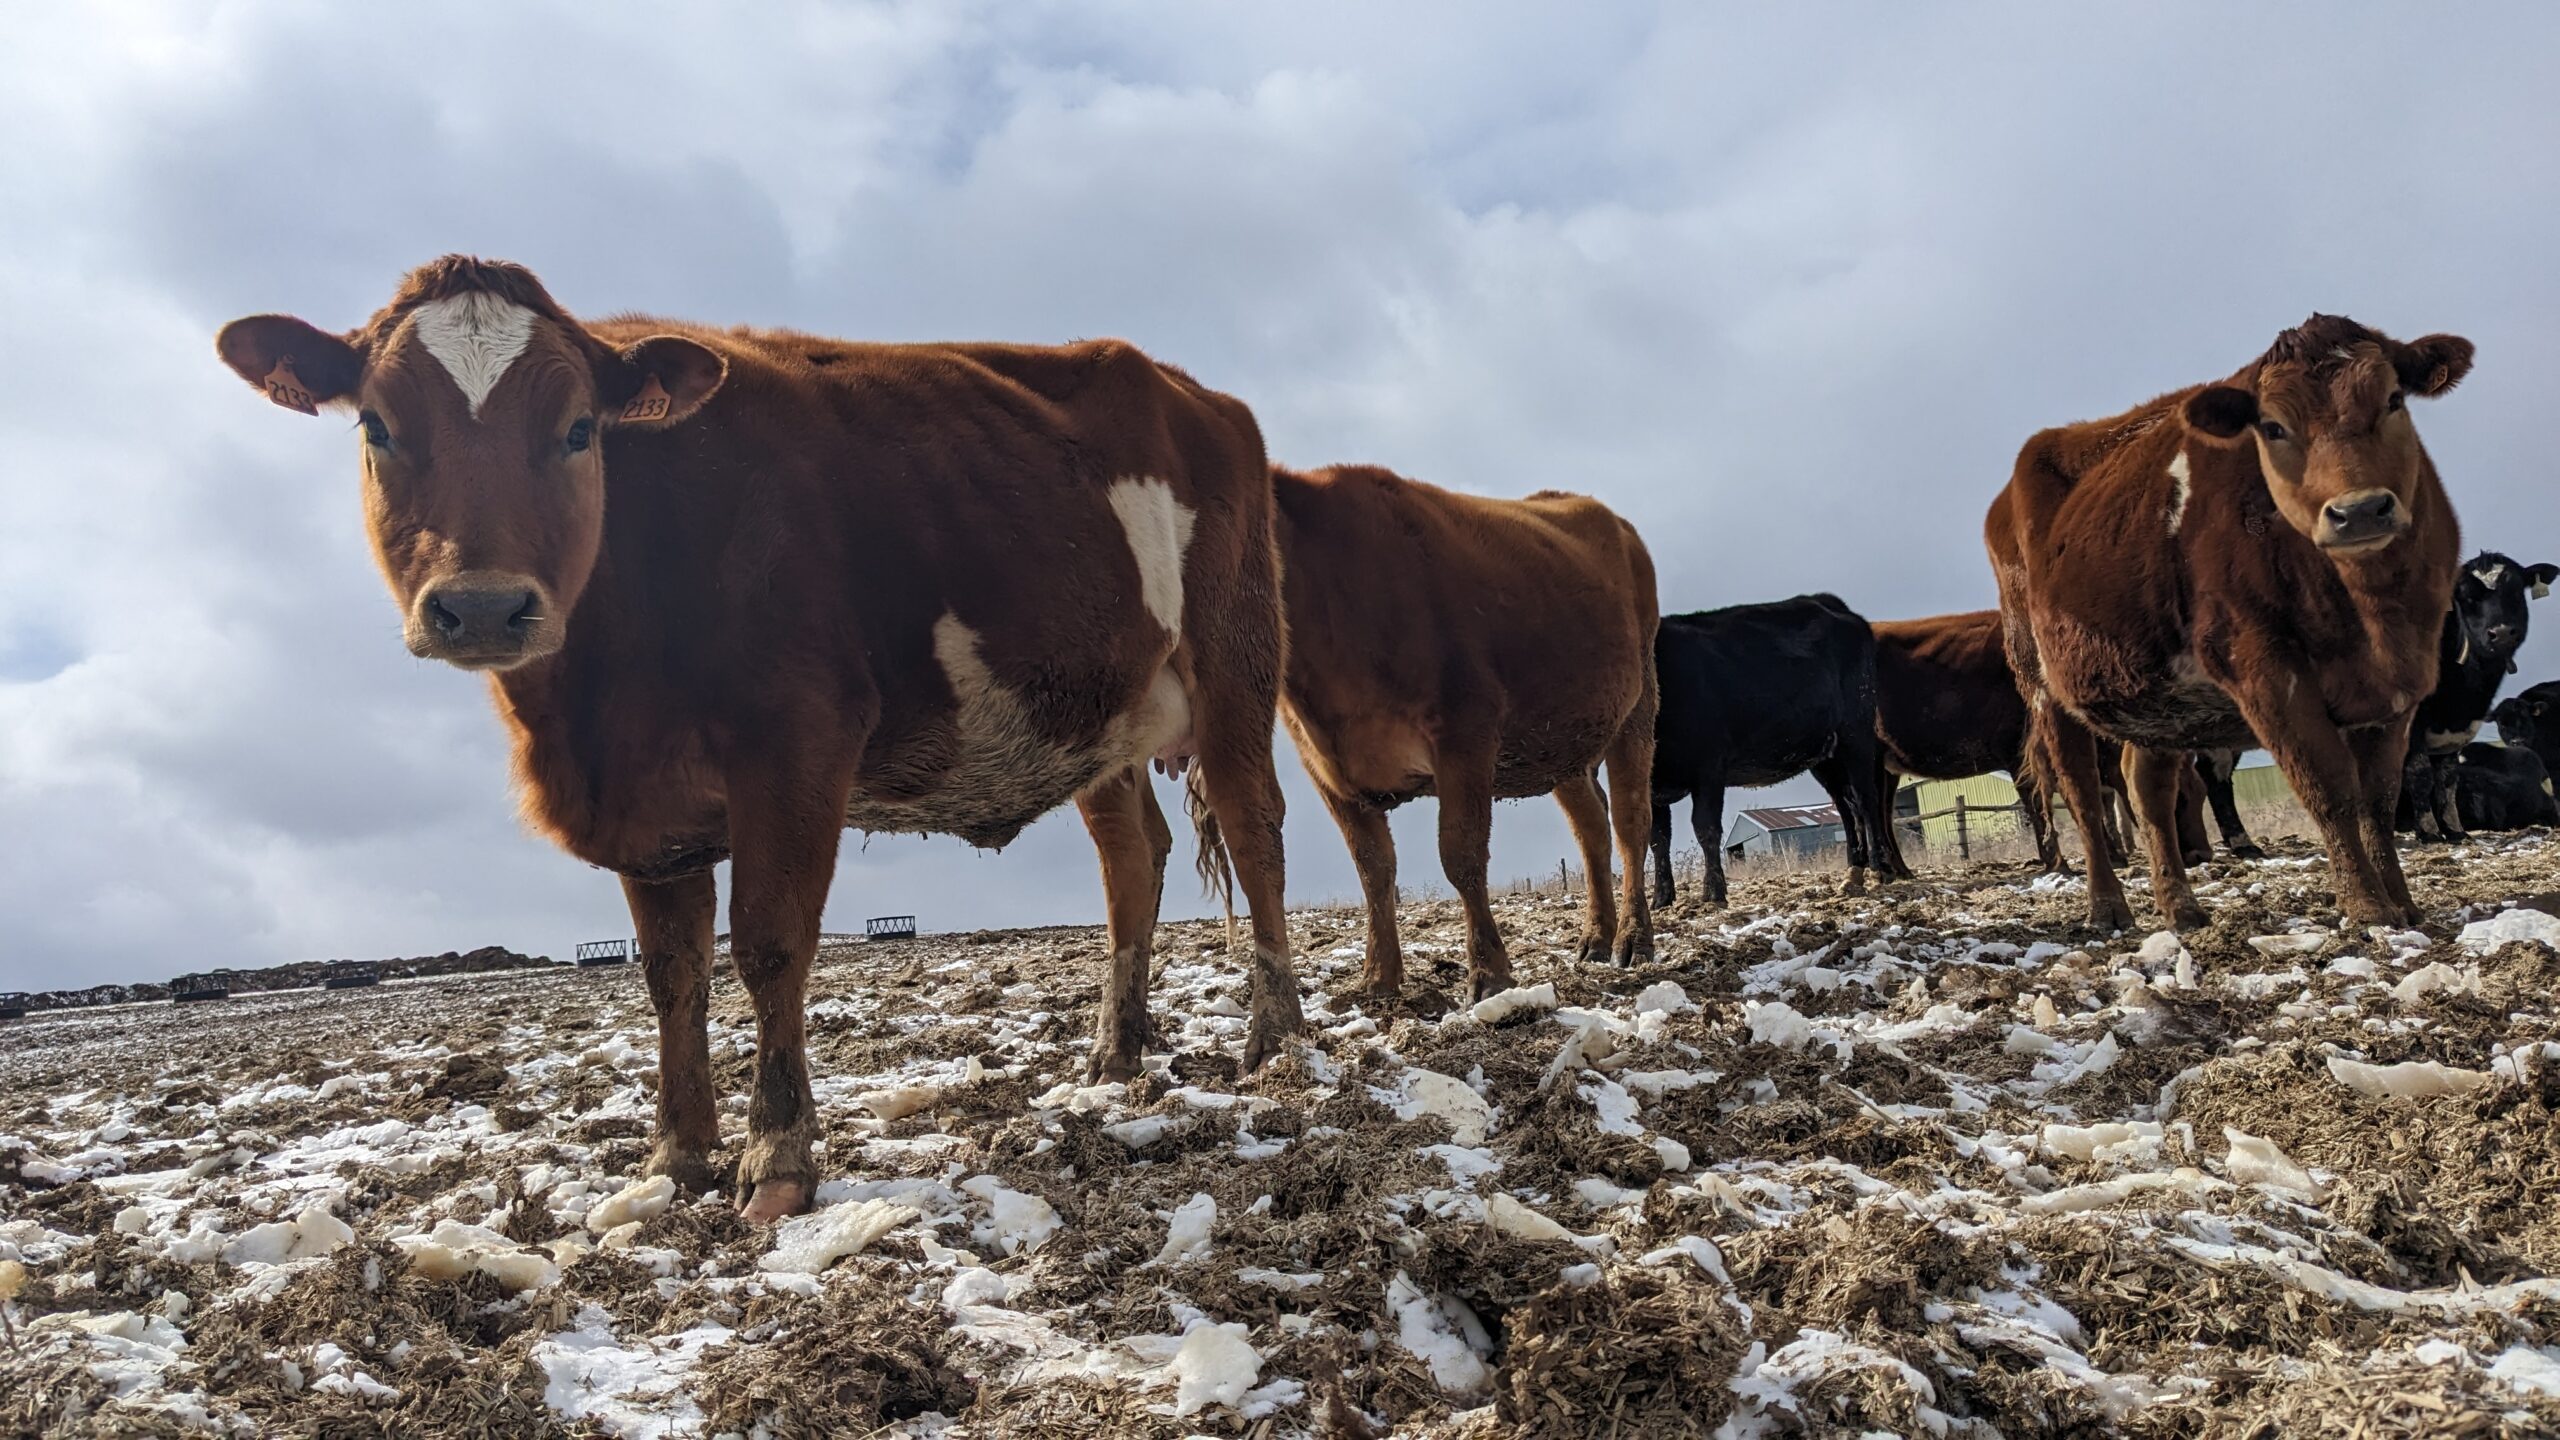 A herd of brown and black cows graze outside during winter, with some snow on the ground.